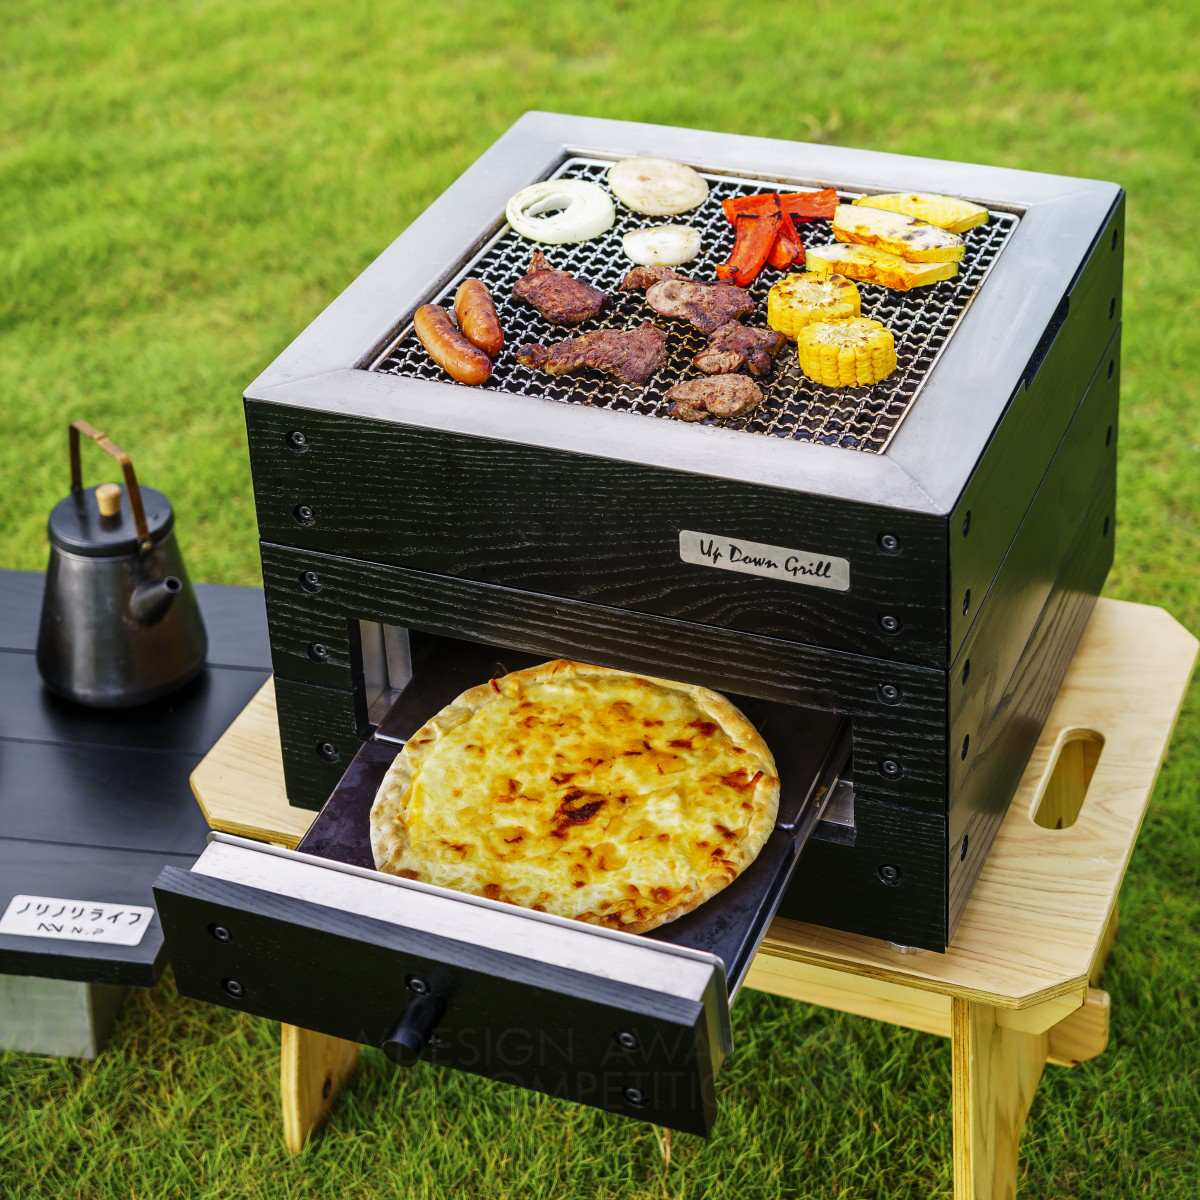 Up Down Grill Portable Oven by Takashi Sekimitsu Bronze Outdoor Gear and Camping Equipment Design Award Winner 2024 